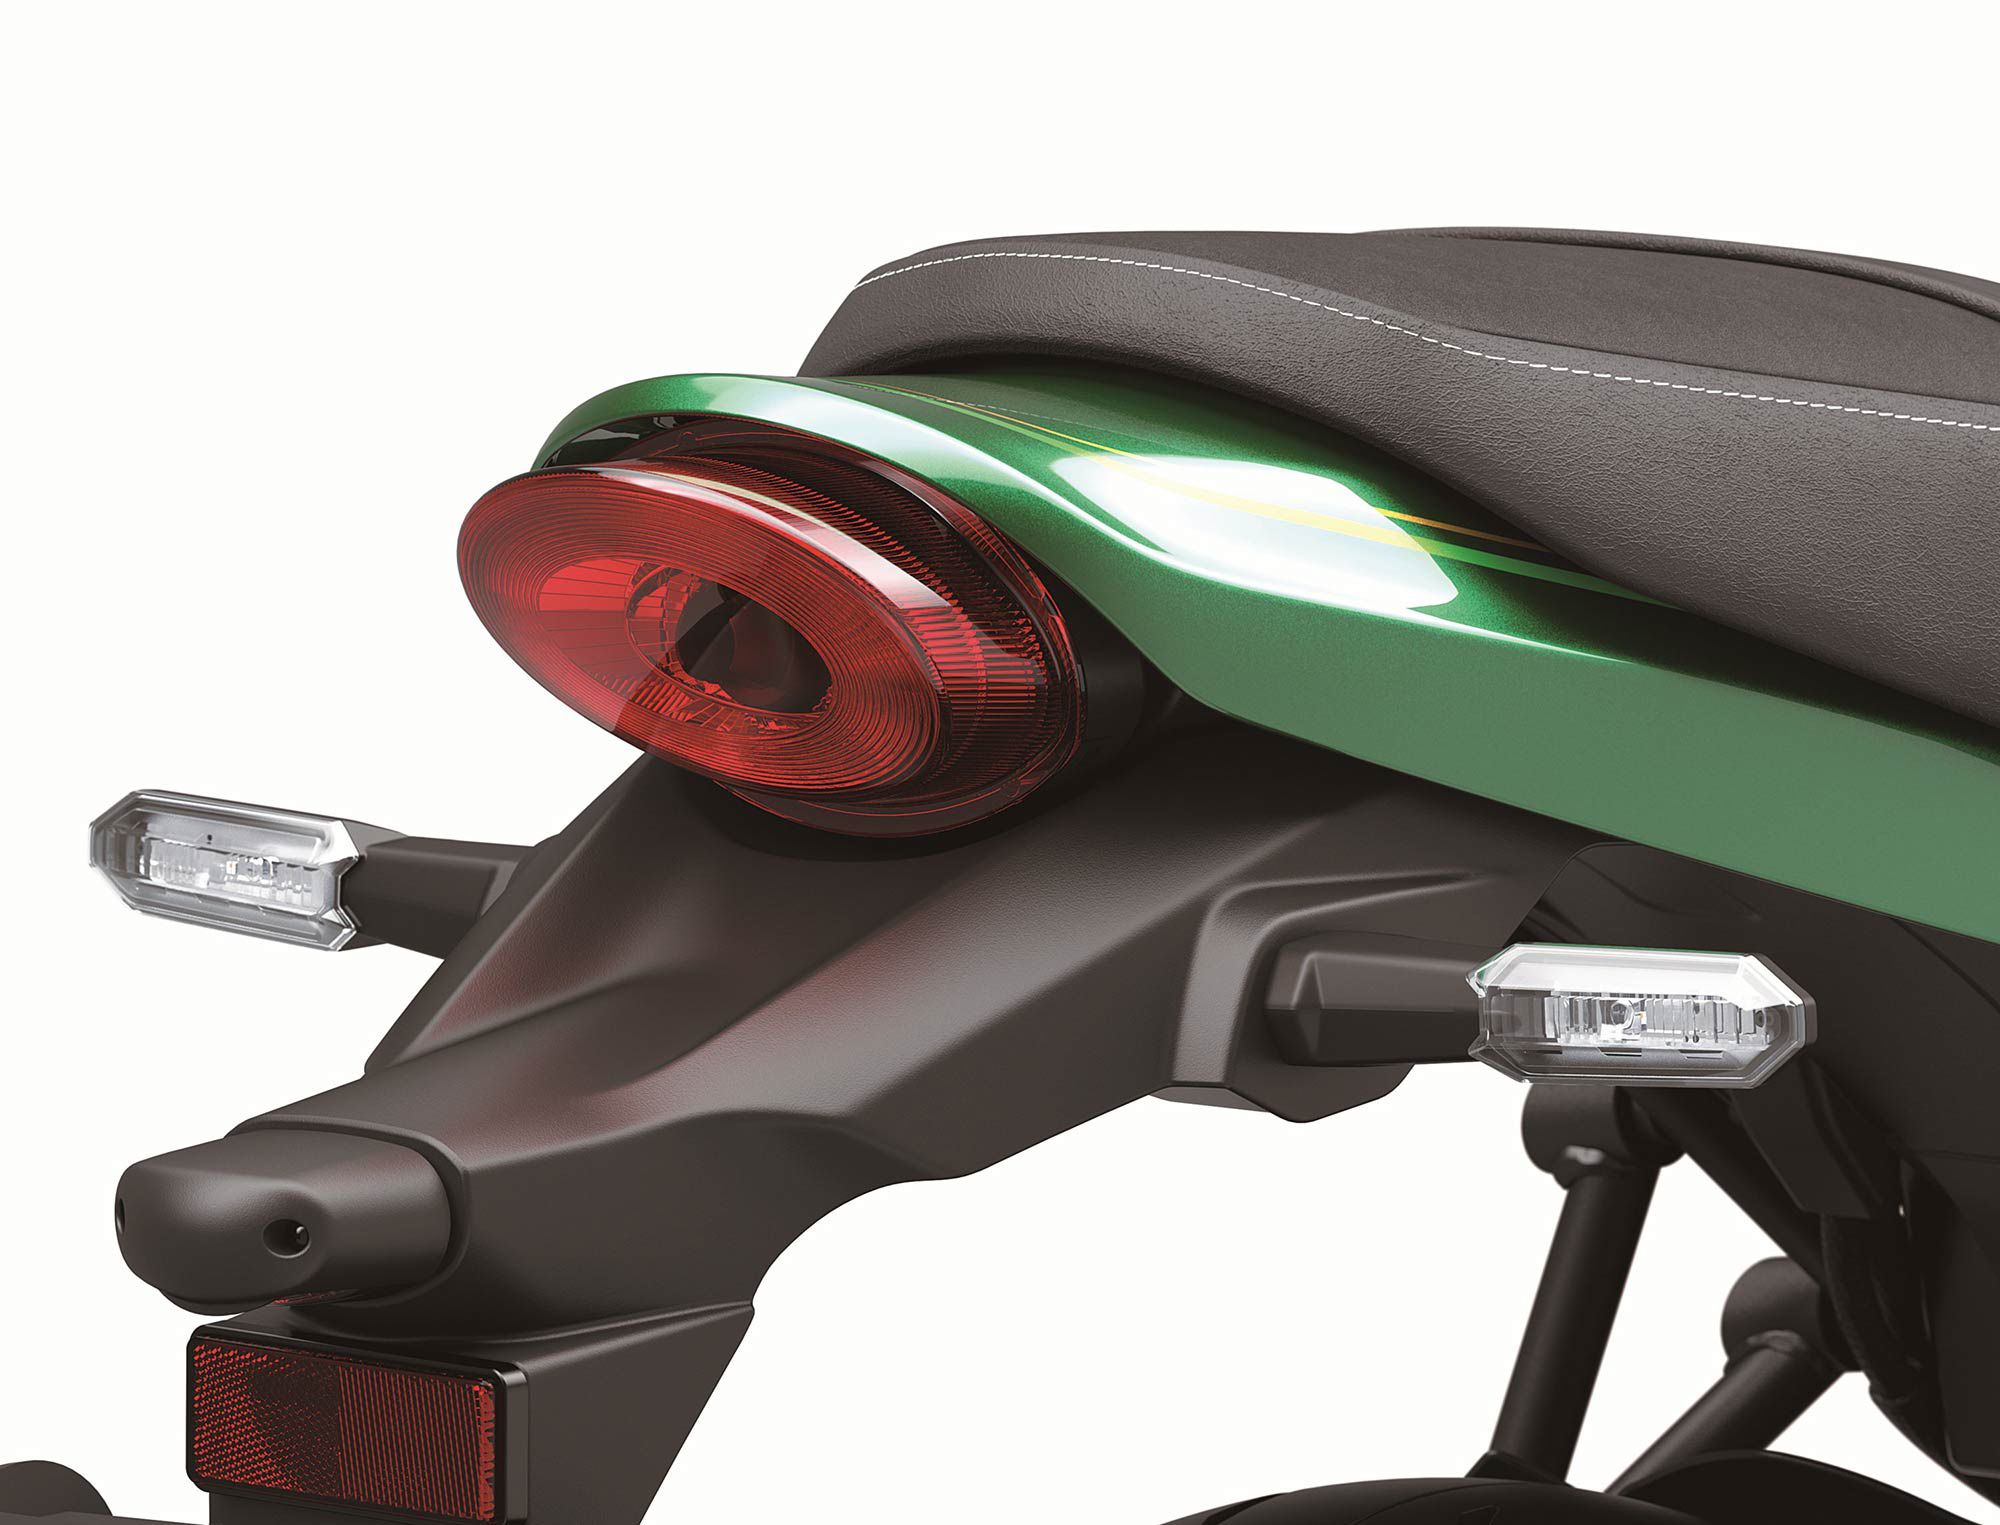 Kawasaki shortened the tailsection of the Z650RS compared to that of the Z900RS.